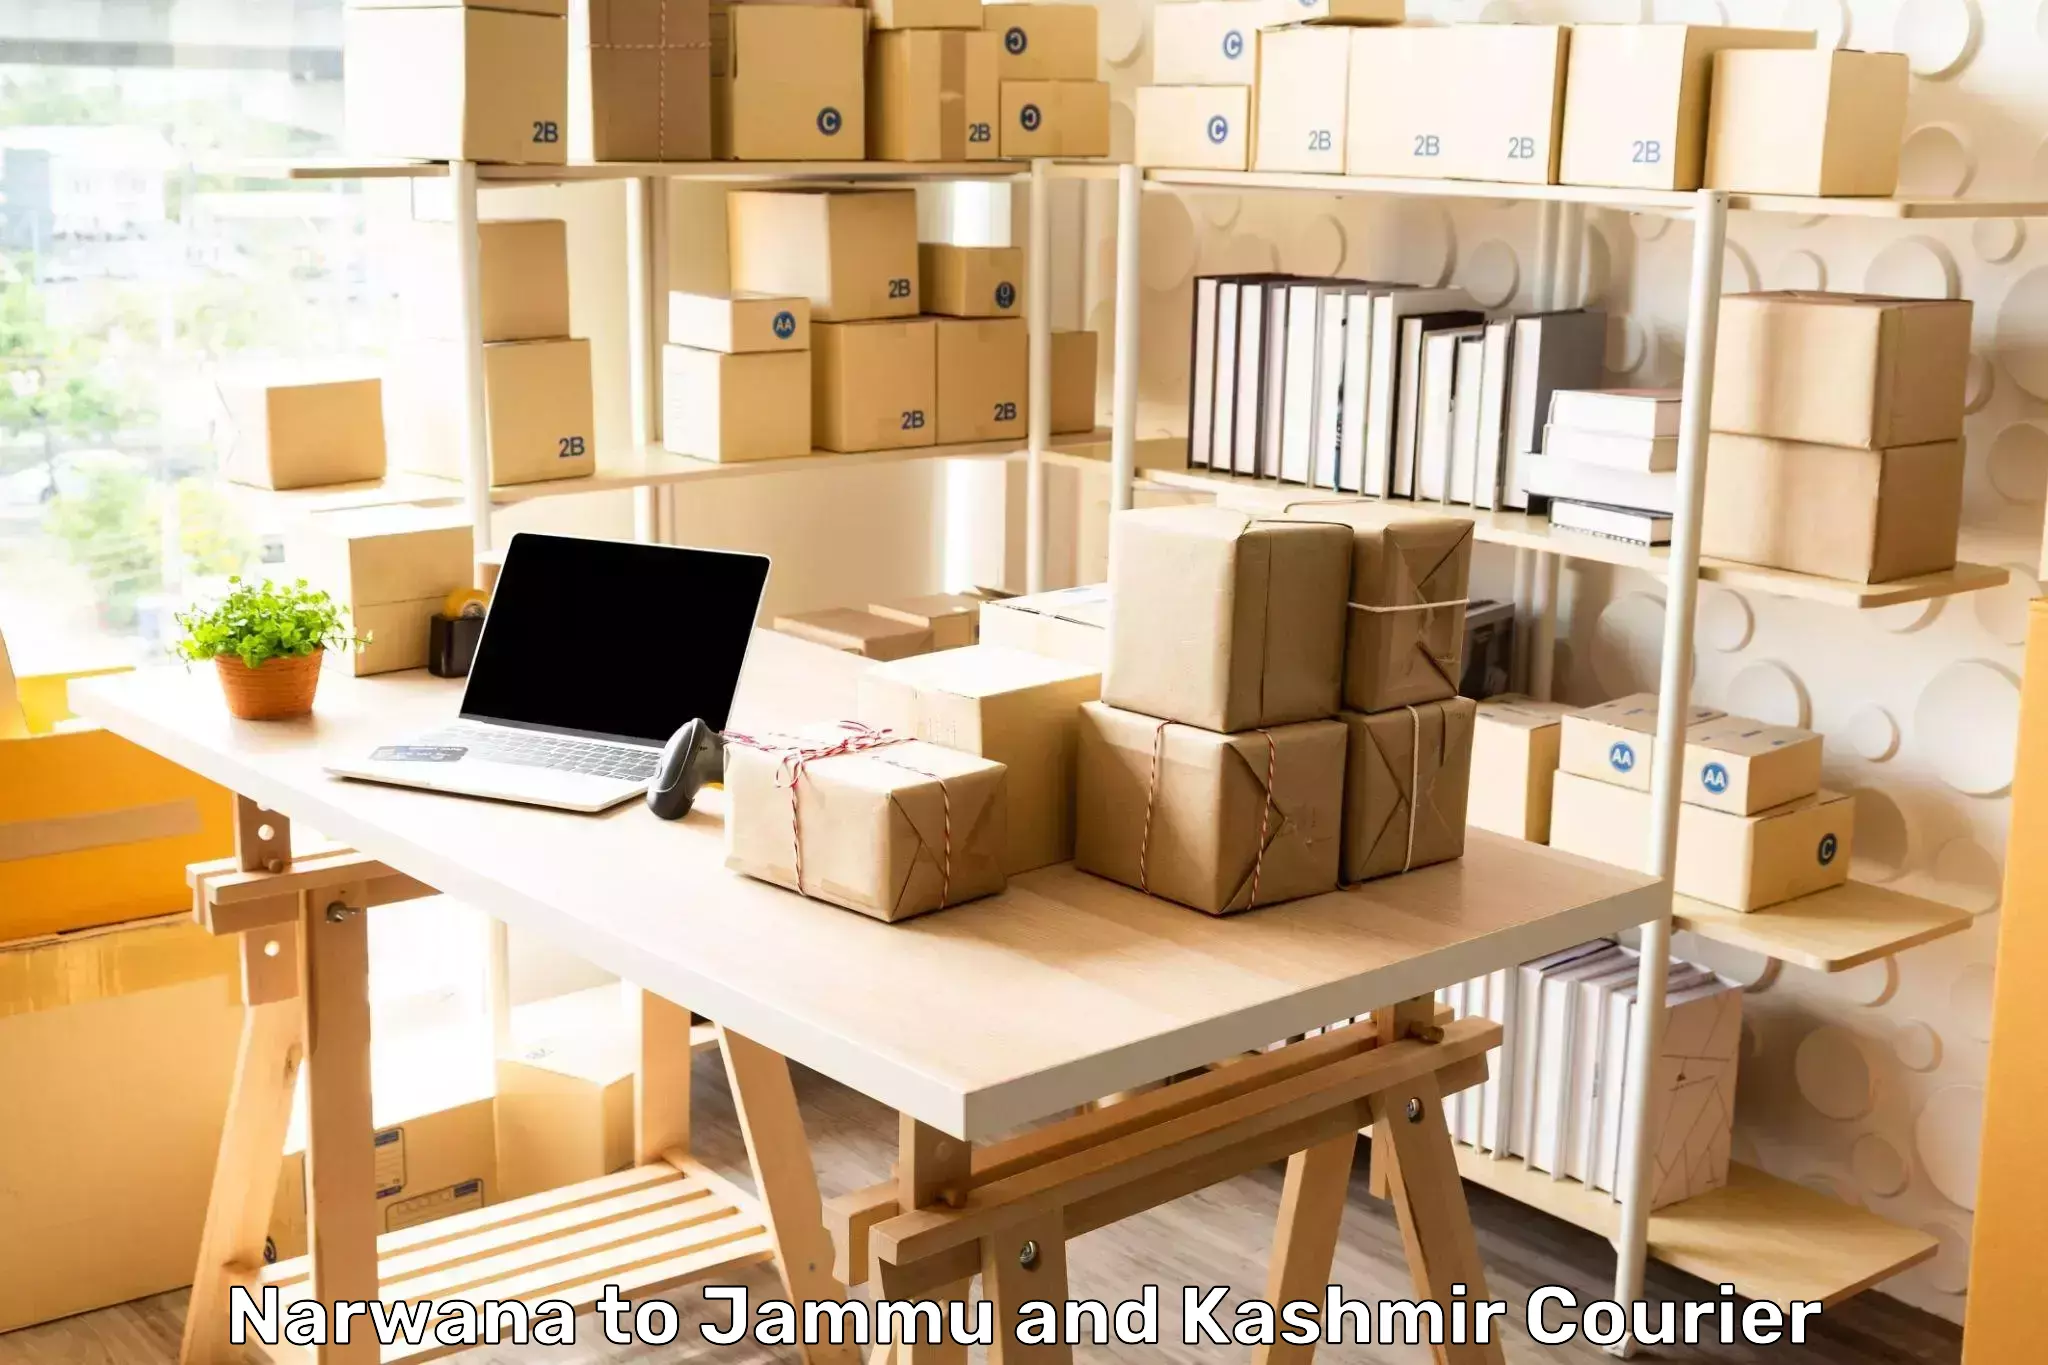 Reliable courier service in Narwana to Anantnag